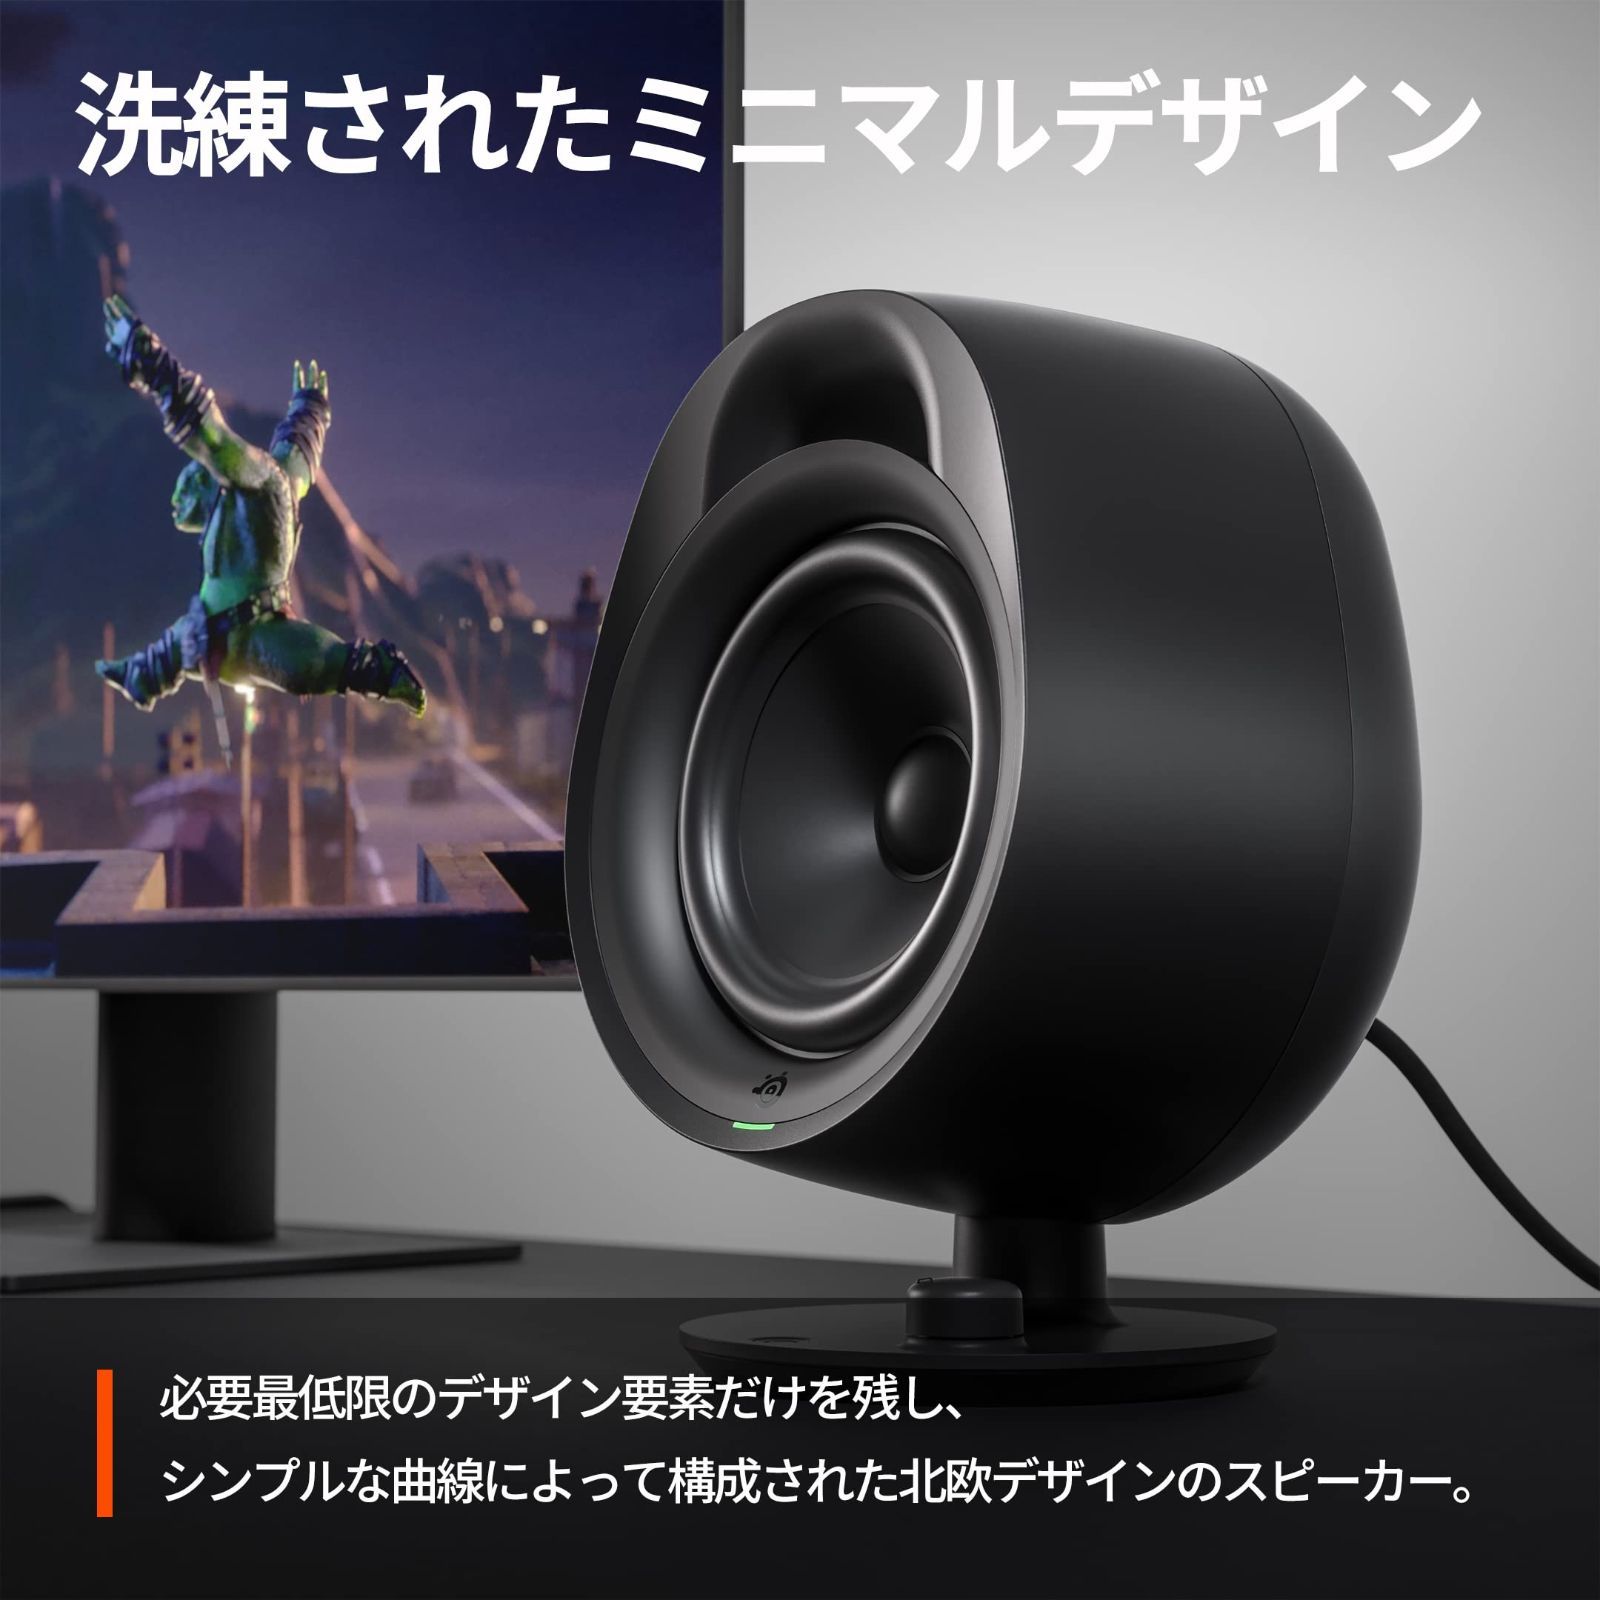 STEELSERIES PCスピーカー ARENA 3 AUX BLUETOOTH 重低音 バスレフ式